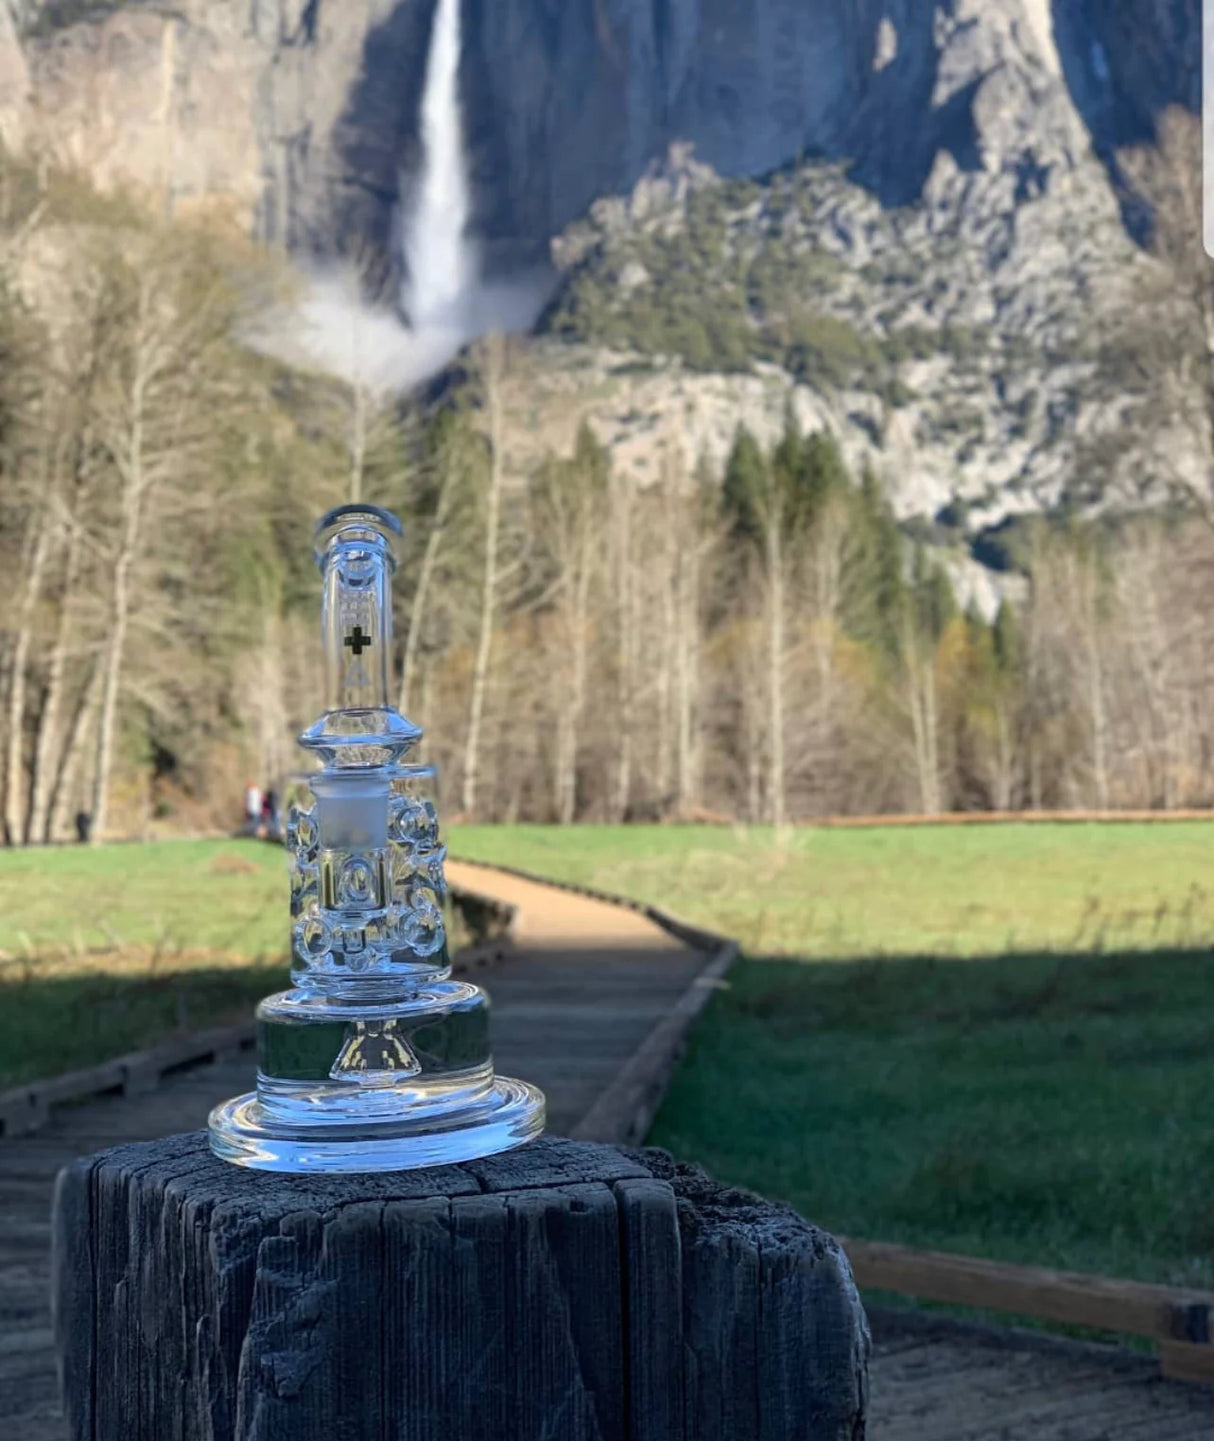 Beta Glass Labs Petra XL clear dab rig with showerhead percolator, outdoor nature backdrop